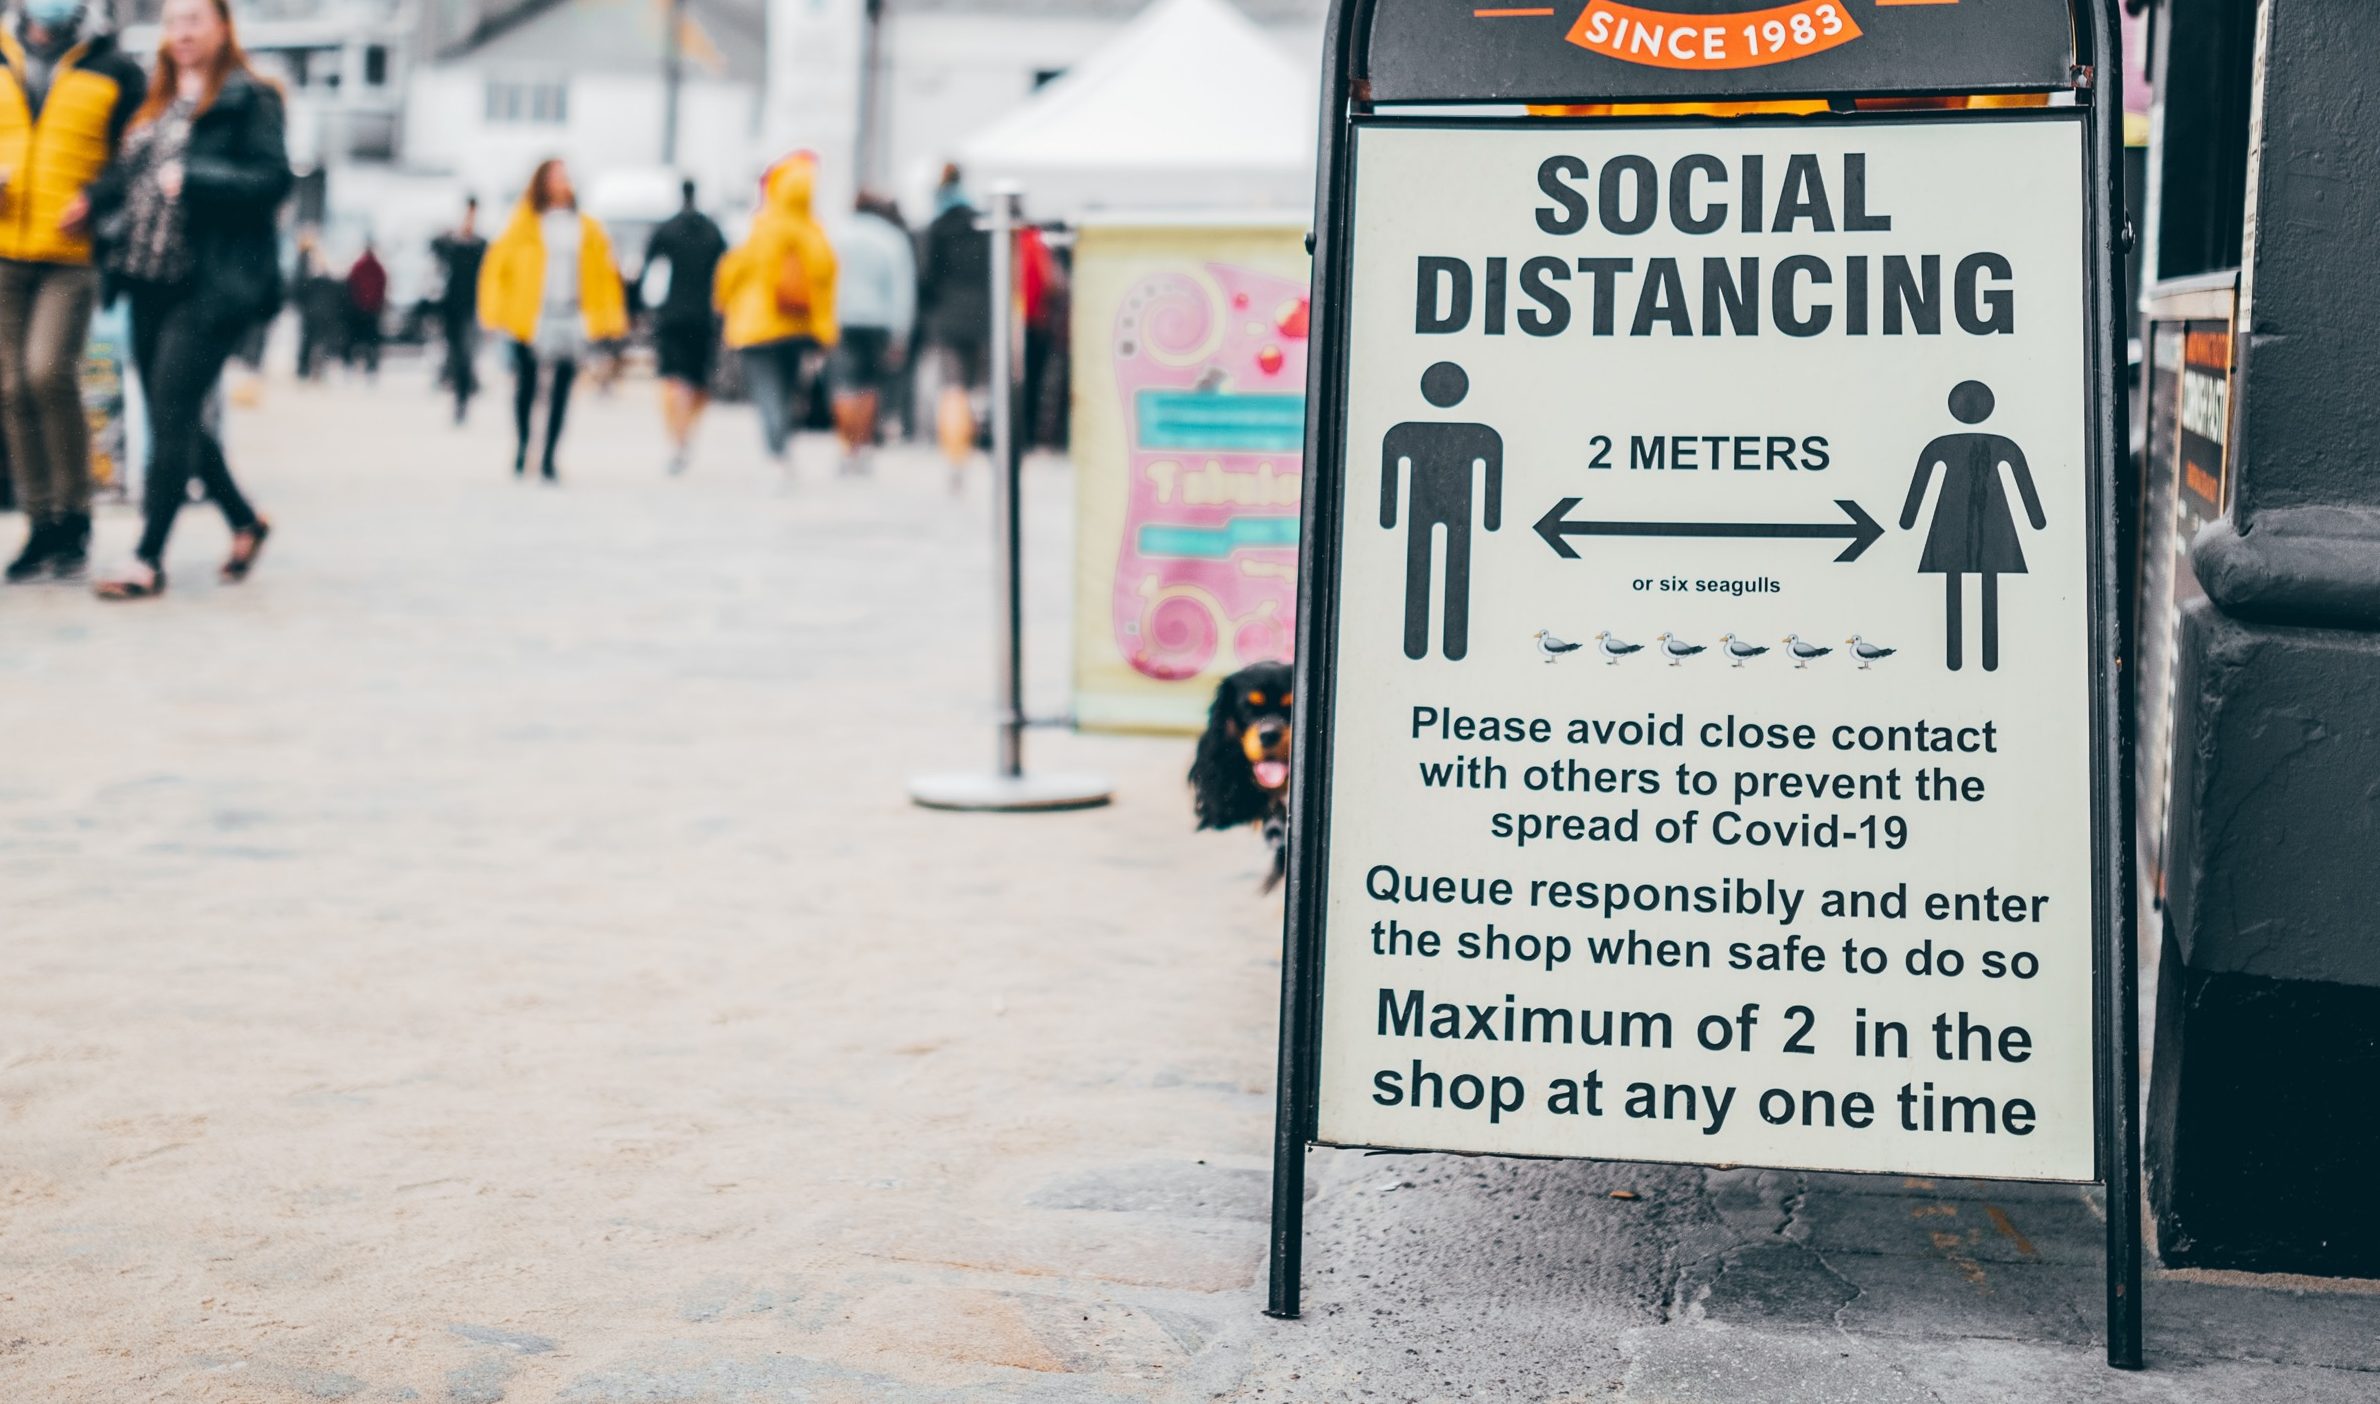 A social distancing sign outside a bakery. Photo by Andy Holmes on Unsplash